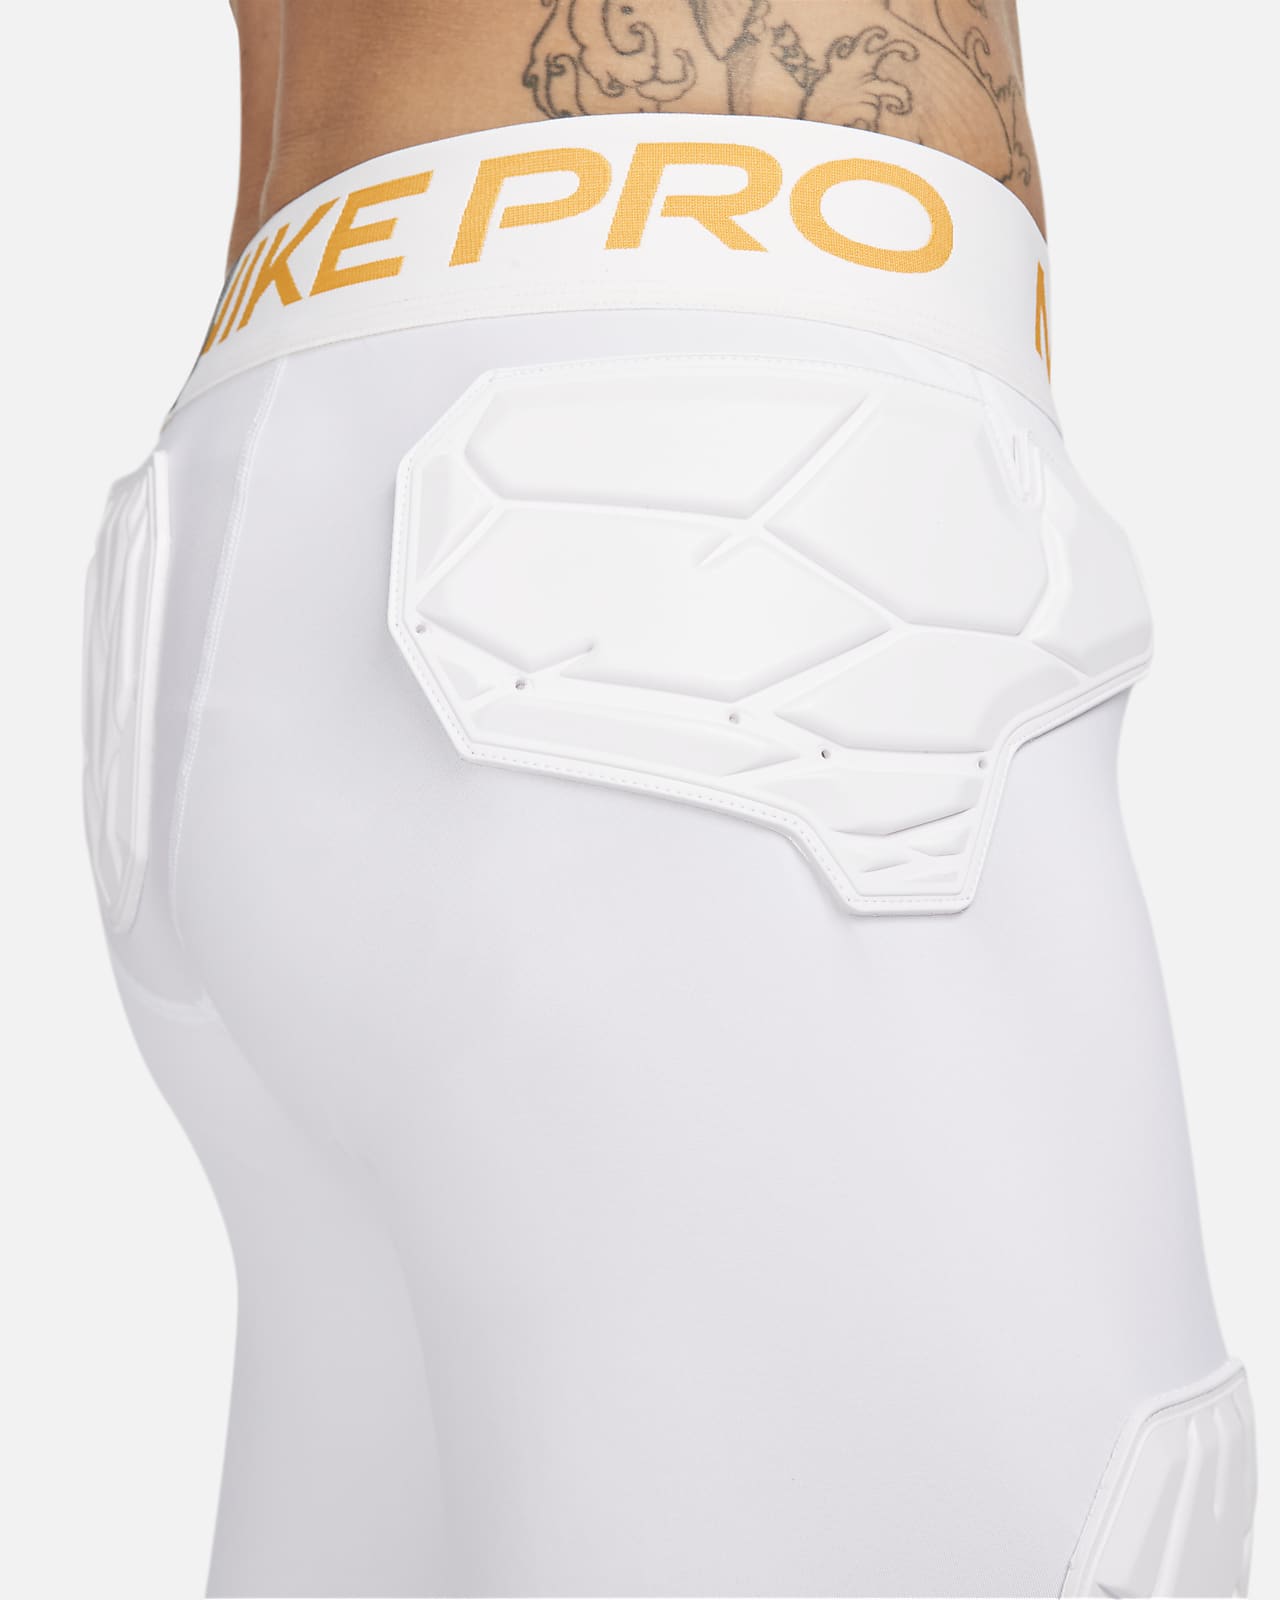 Nike Pro Men's Combat Hyperstrong Power Compression Shorts | 502609-010  X-Large 